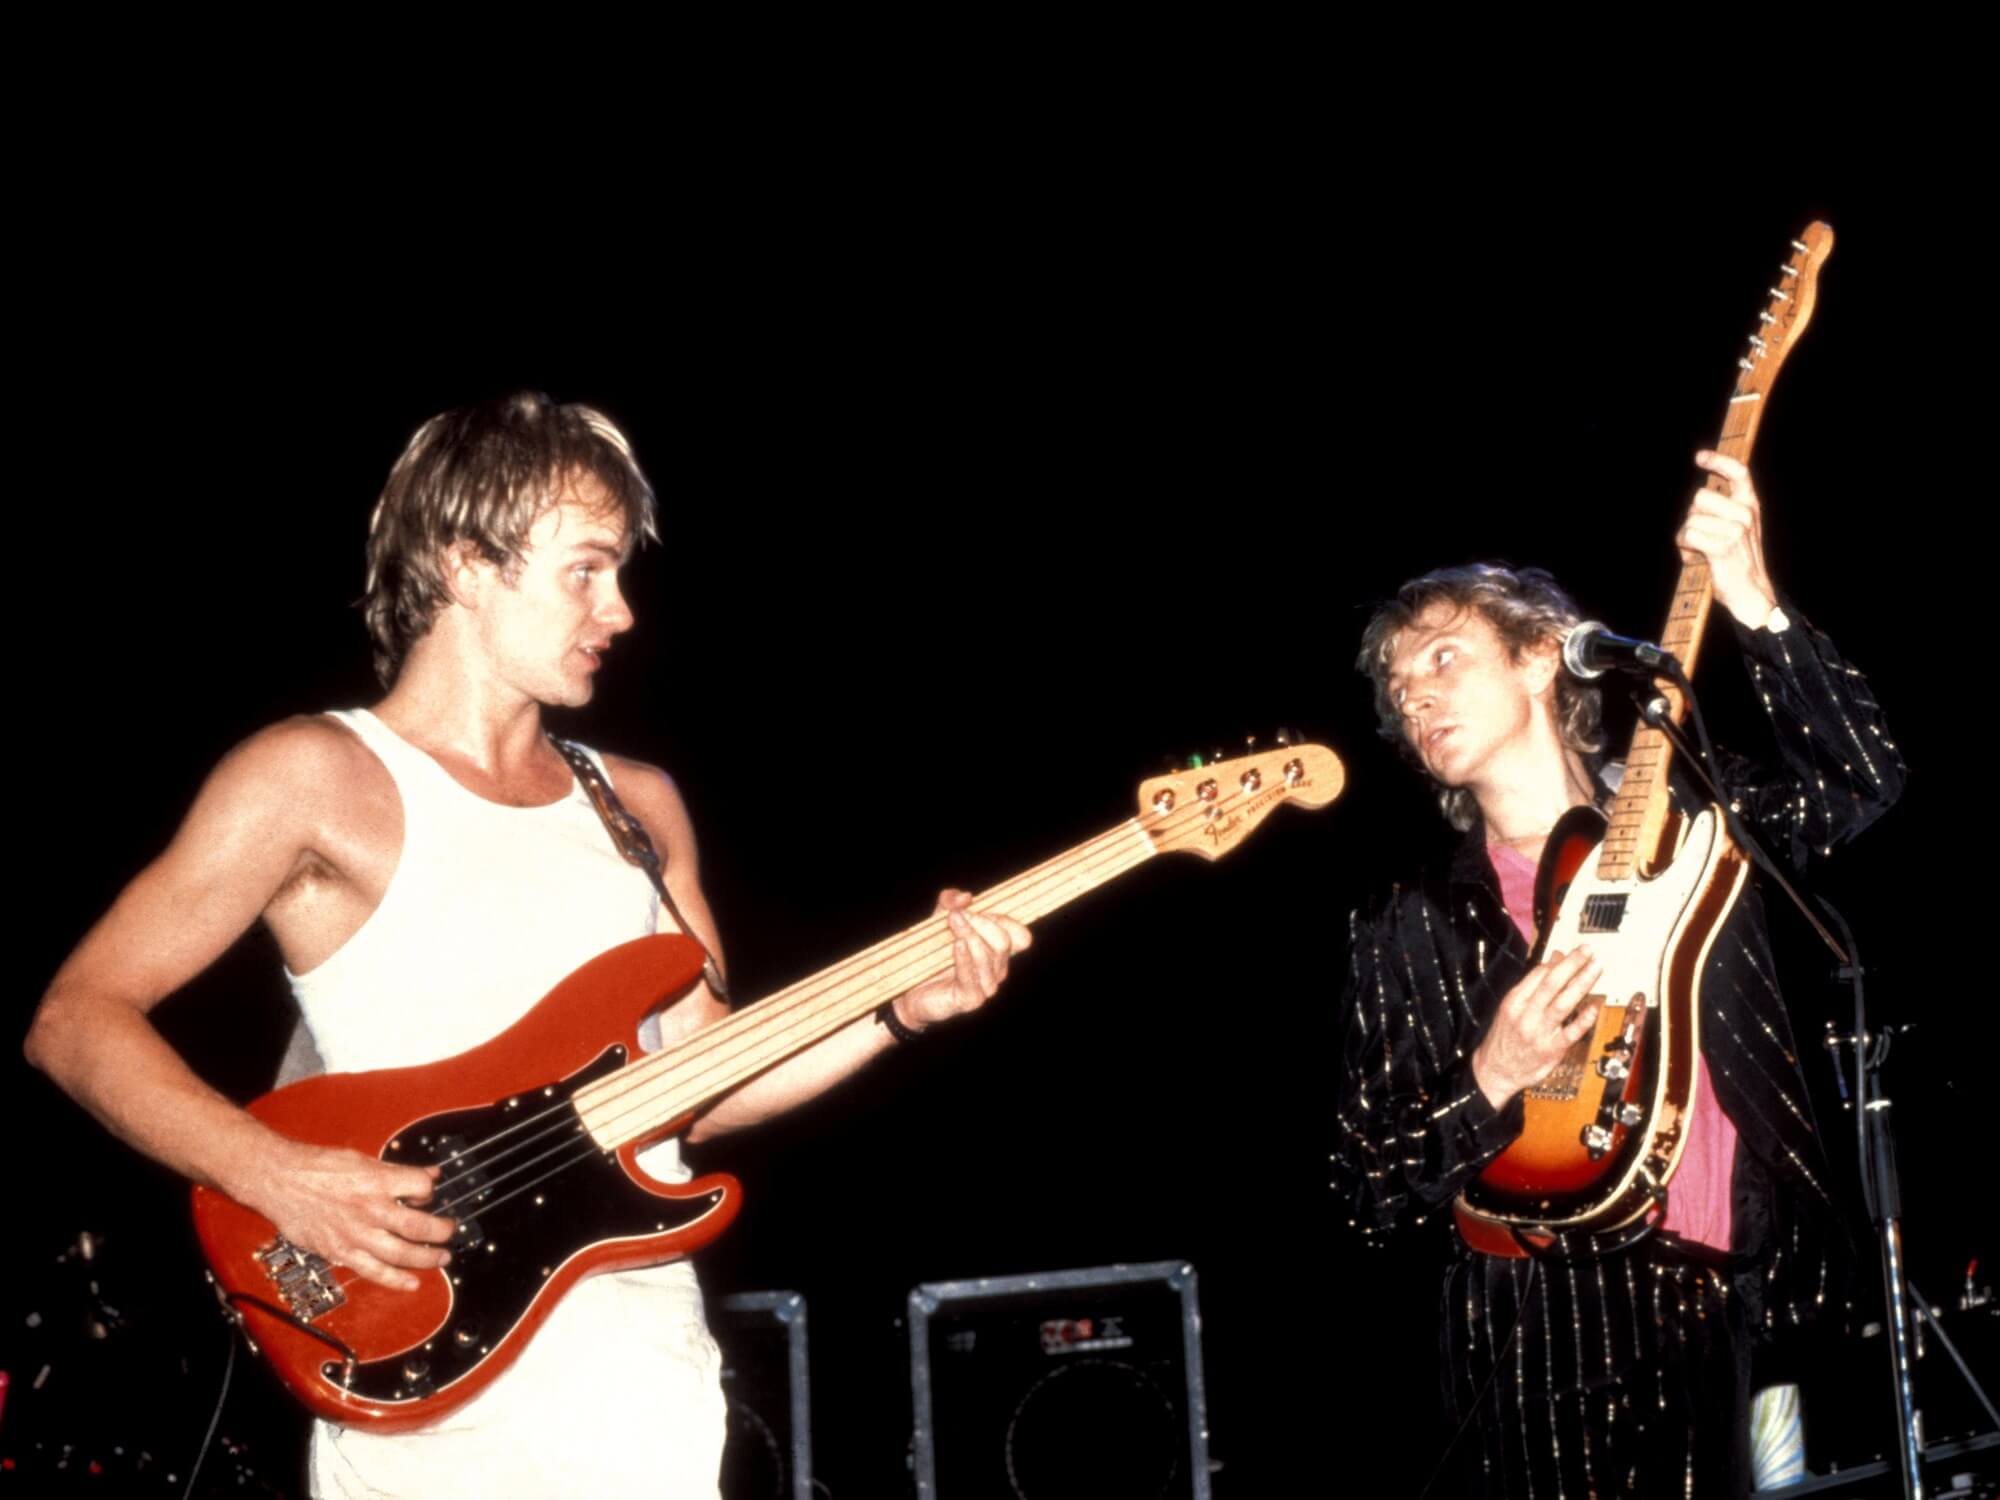 Sting and Andy Summers performing live with The Police